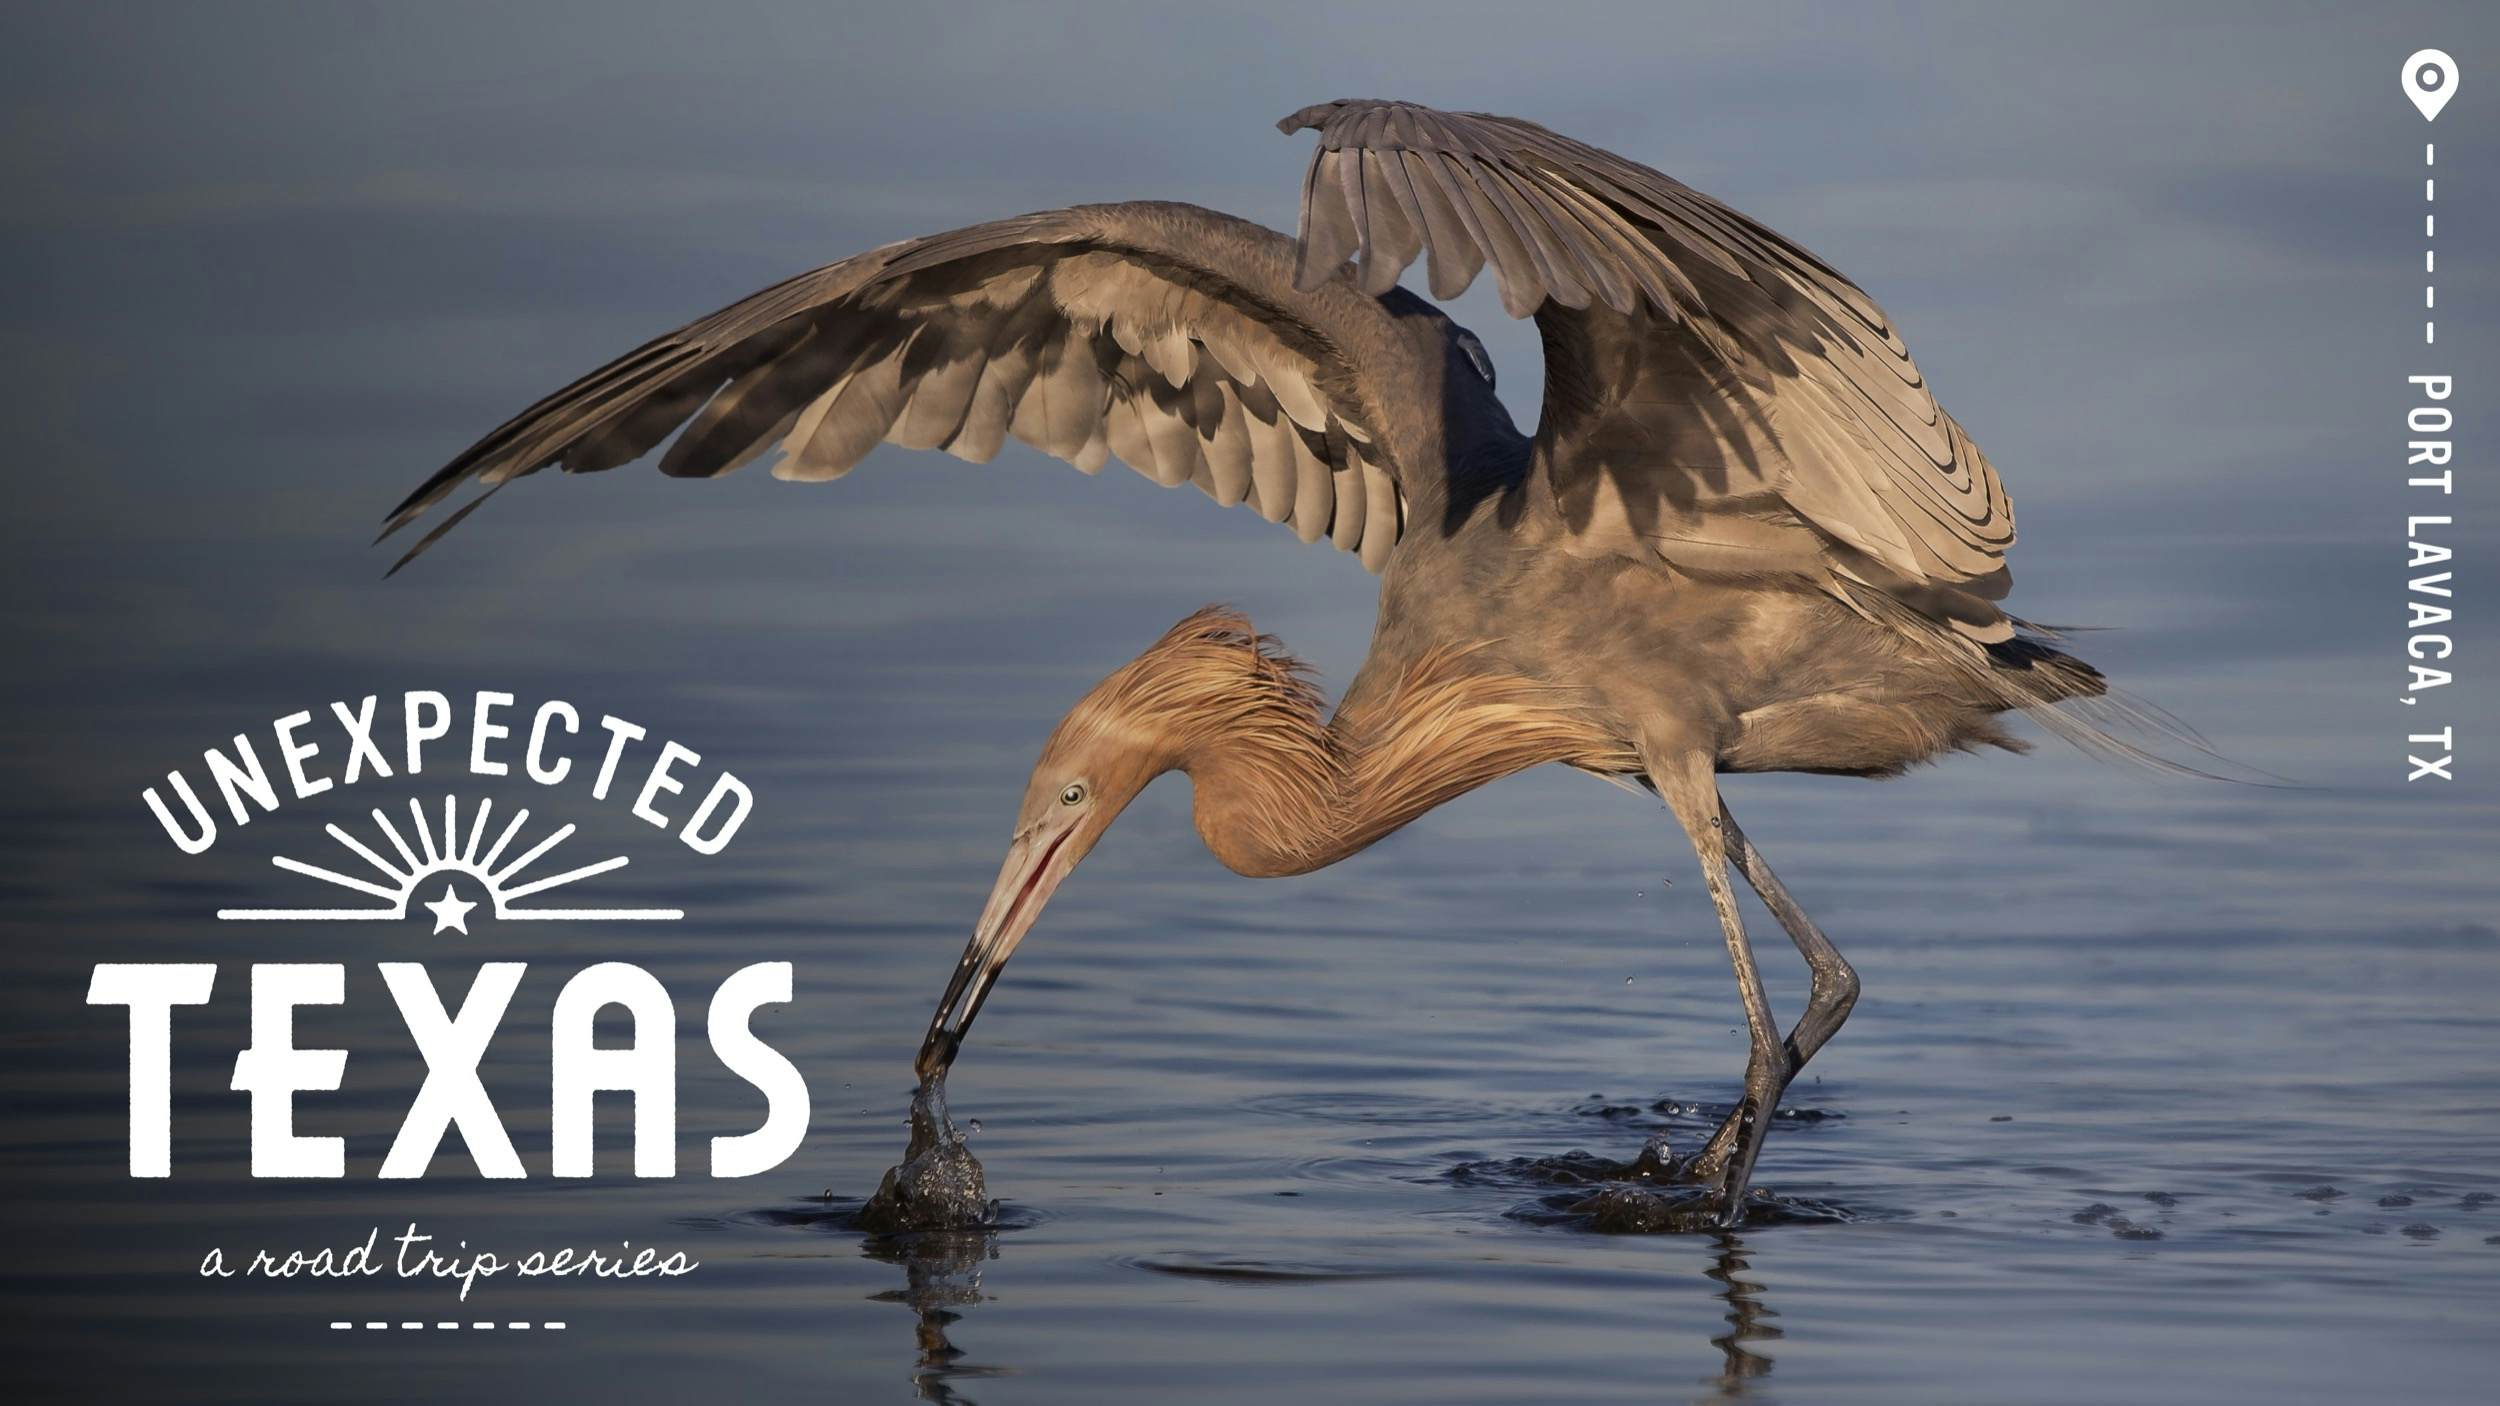 Port Lavaca is a hidden gem for wildlife on the Texas coast - Lonely Planet